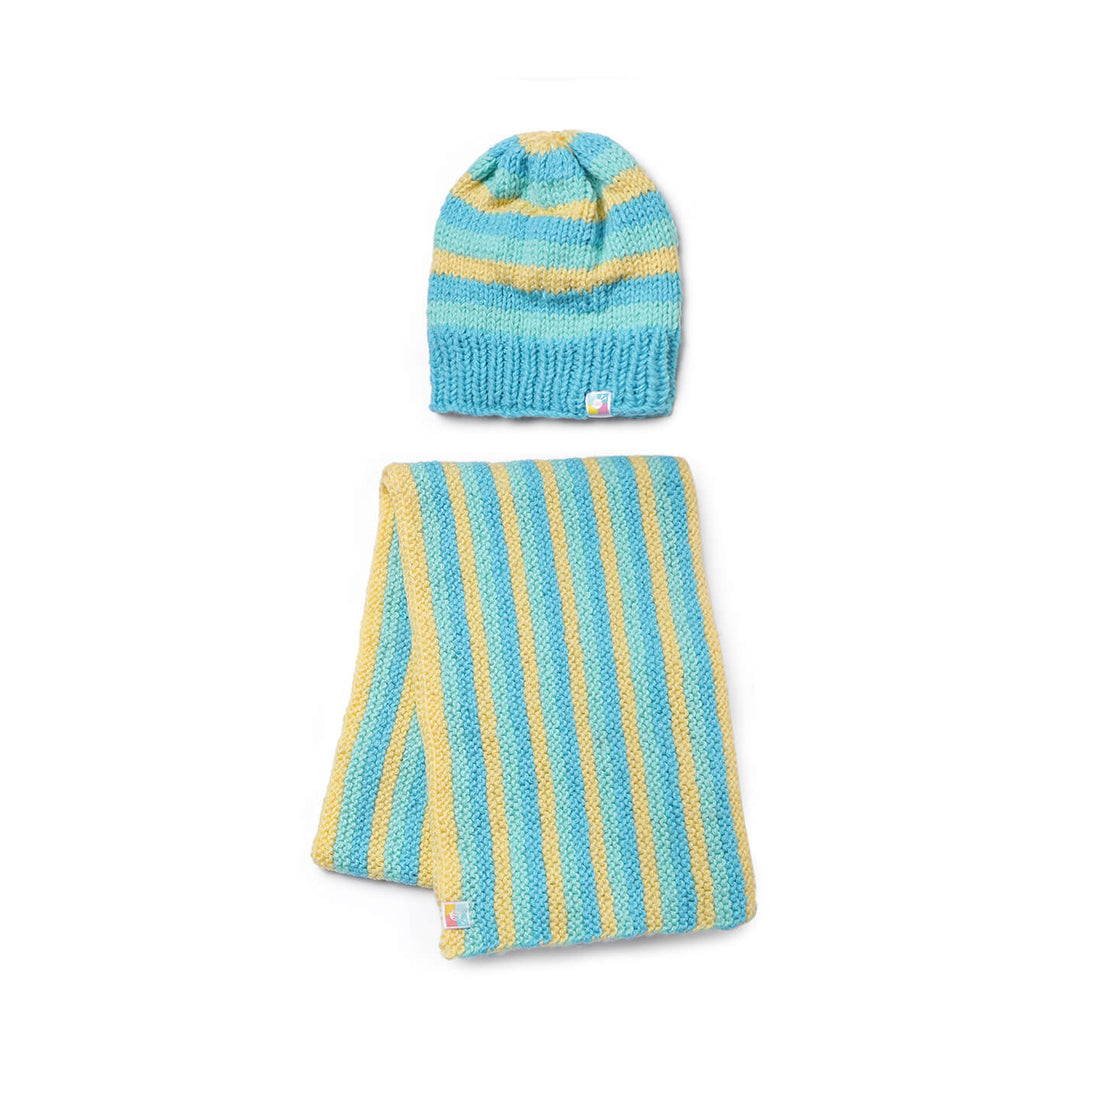 Beanie and Scarf Coordinating Set - 3173